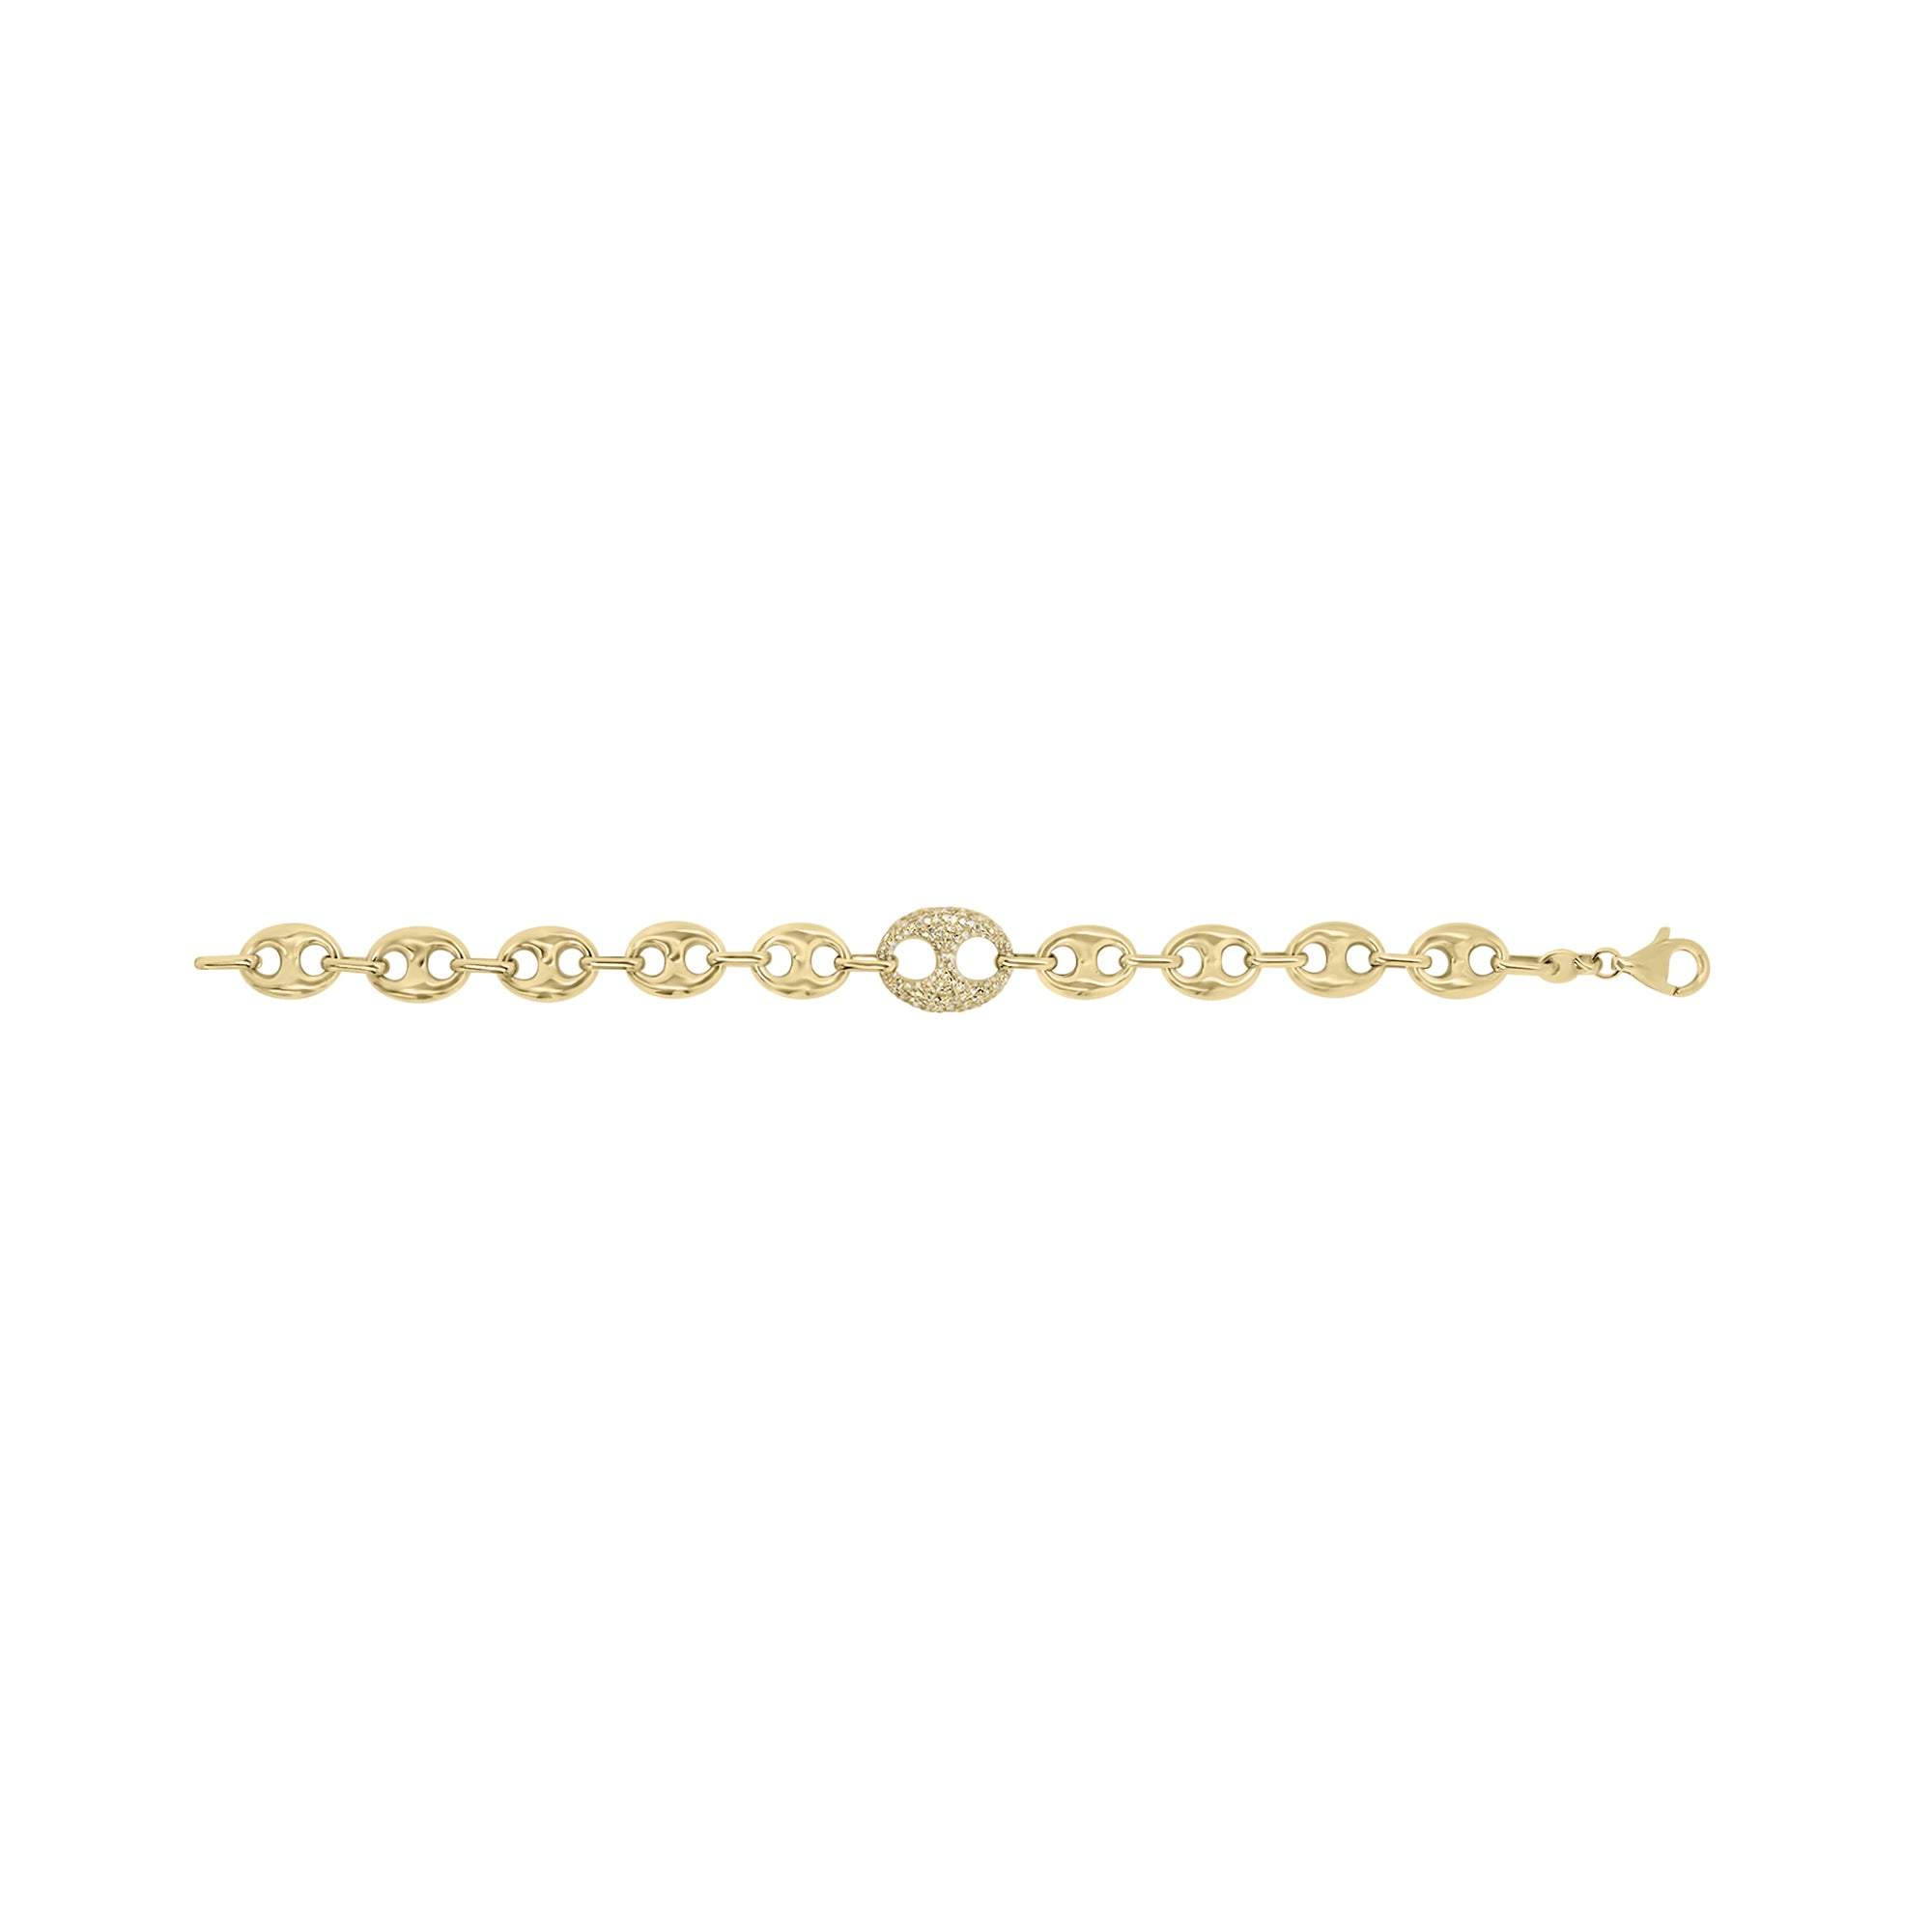 Pave Diamond Puffed Mariner Chain Link Bracelet - 14K gold weighing 9.30 grams  - 136 round diamonds weighing 0.53 carats